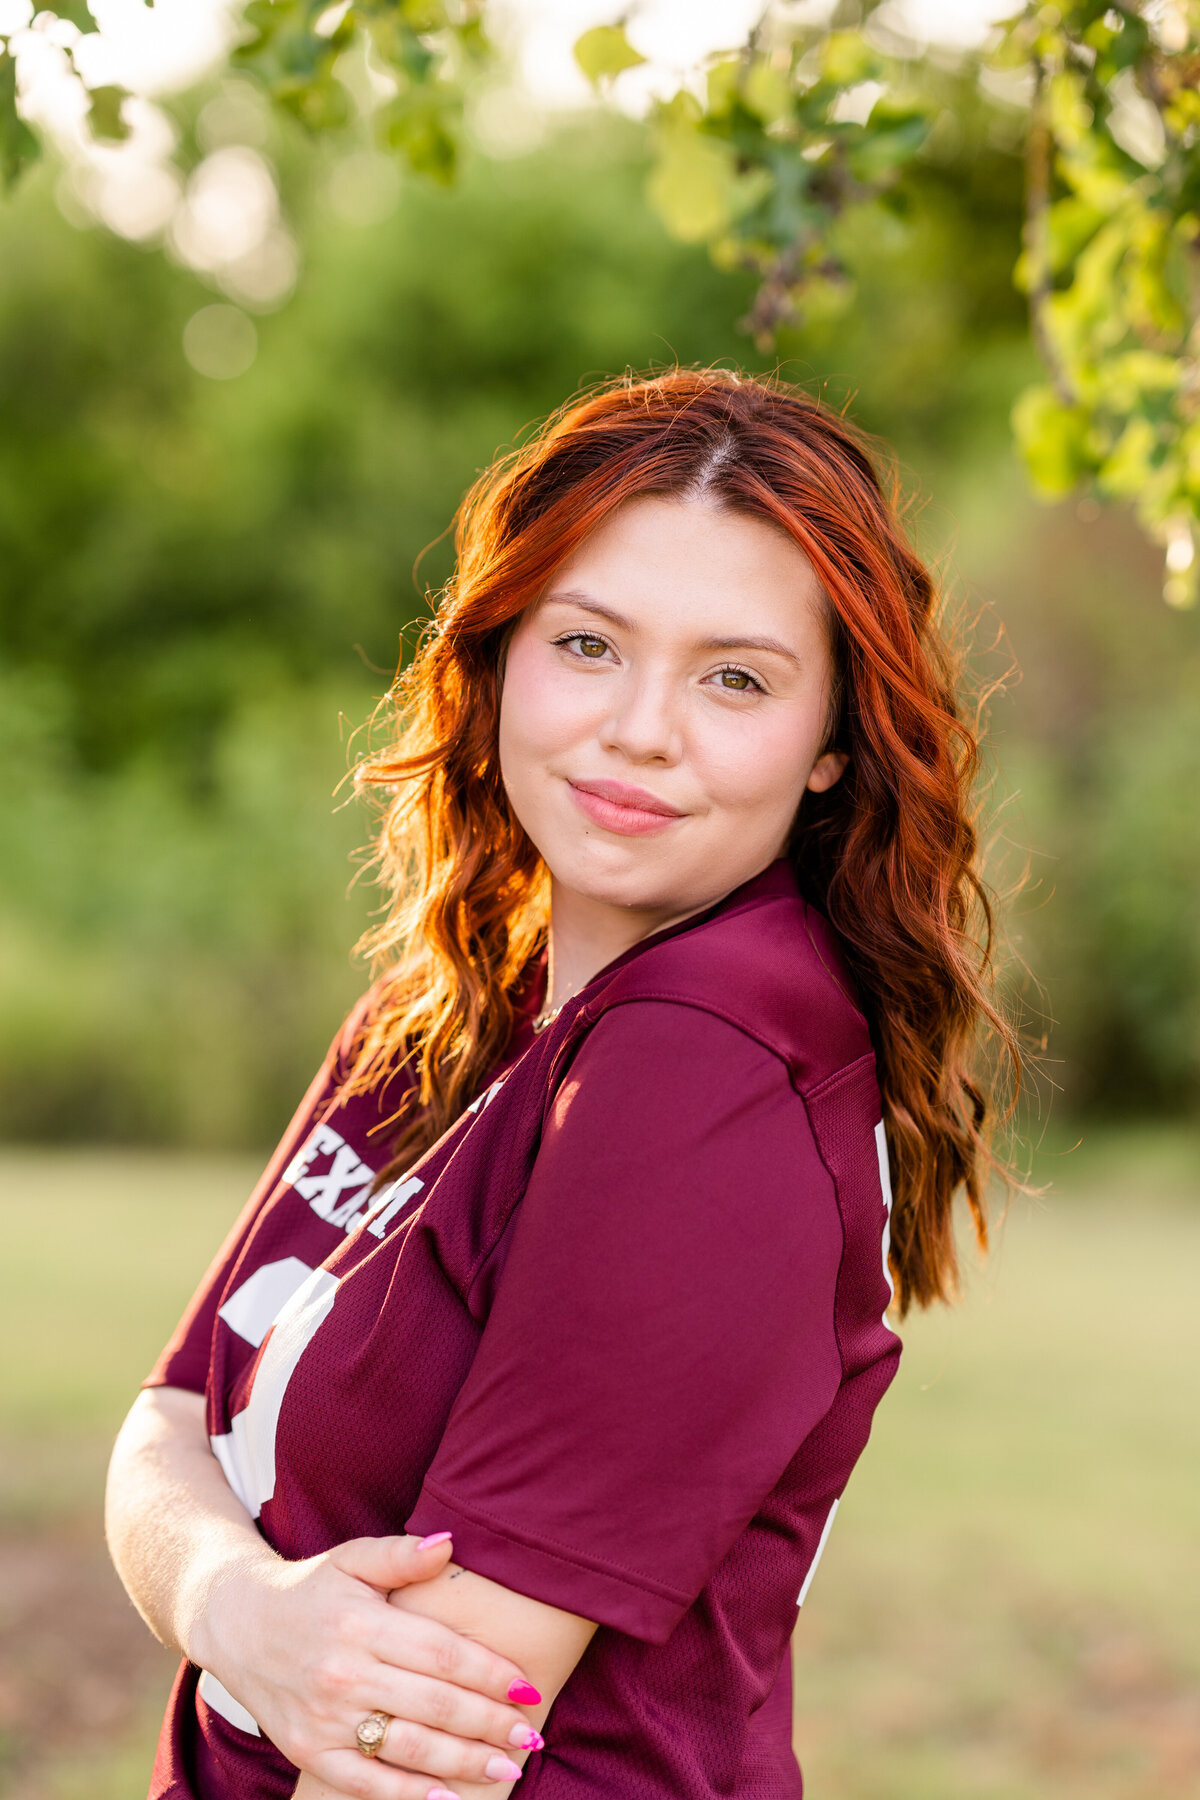 Texas A&M senior girl looking over shoulder and smiling at camera wearing maroon jersey and holding elbow surrounded by nature at sunset at Leaching Teaching Gardens